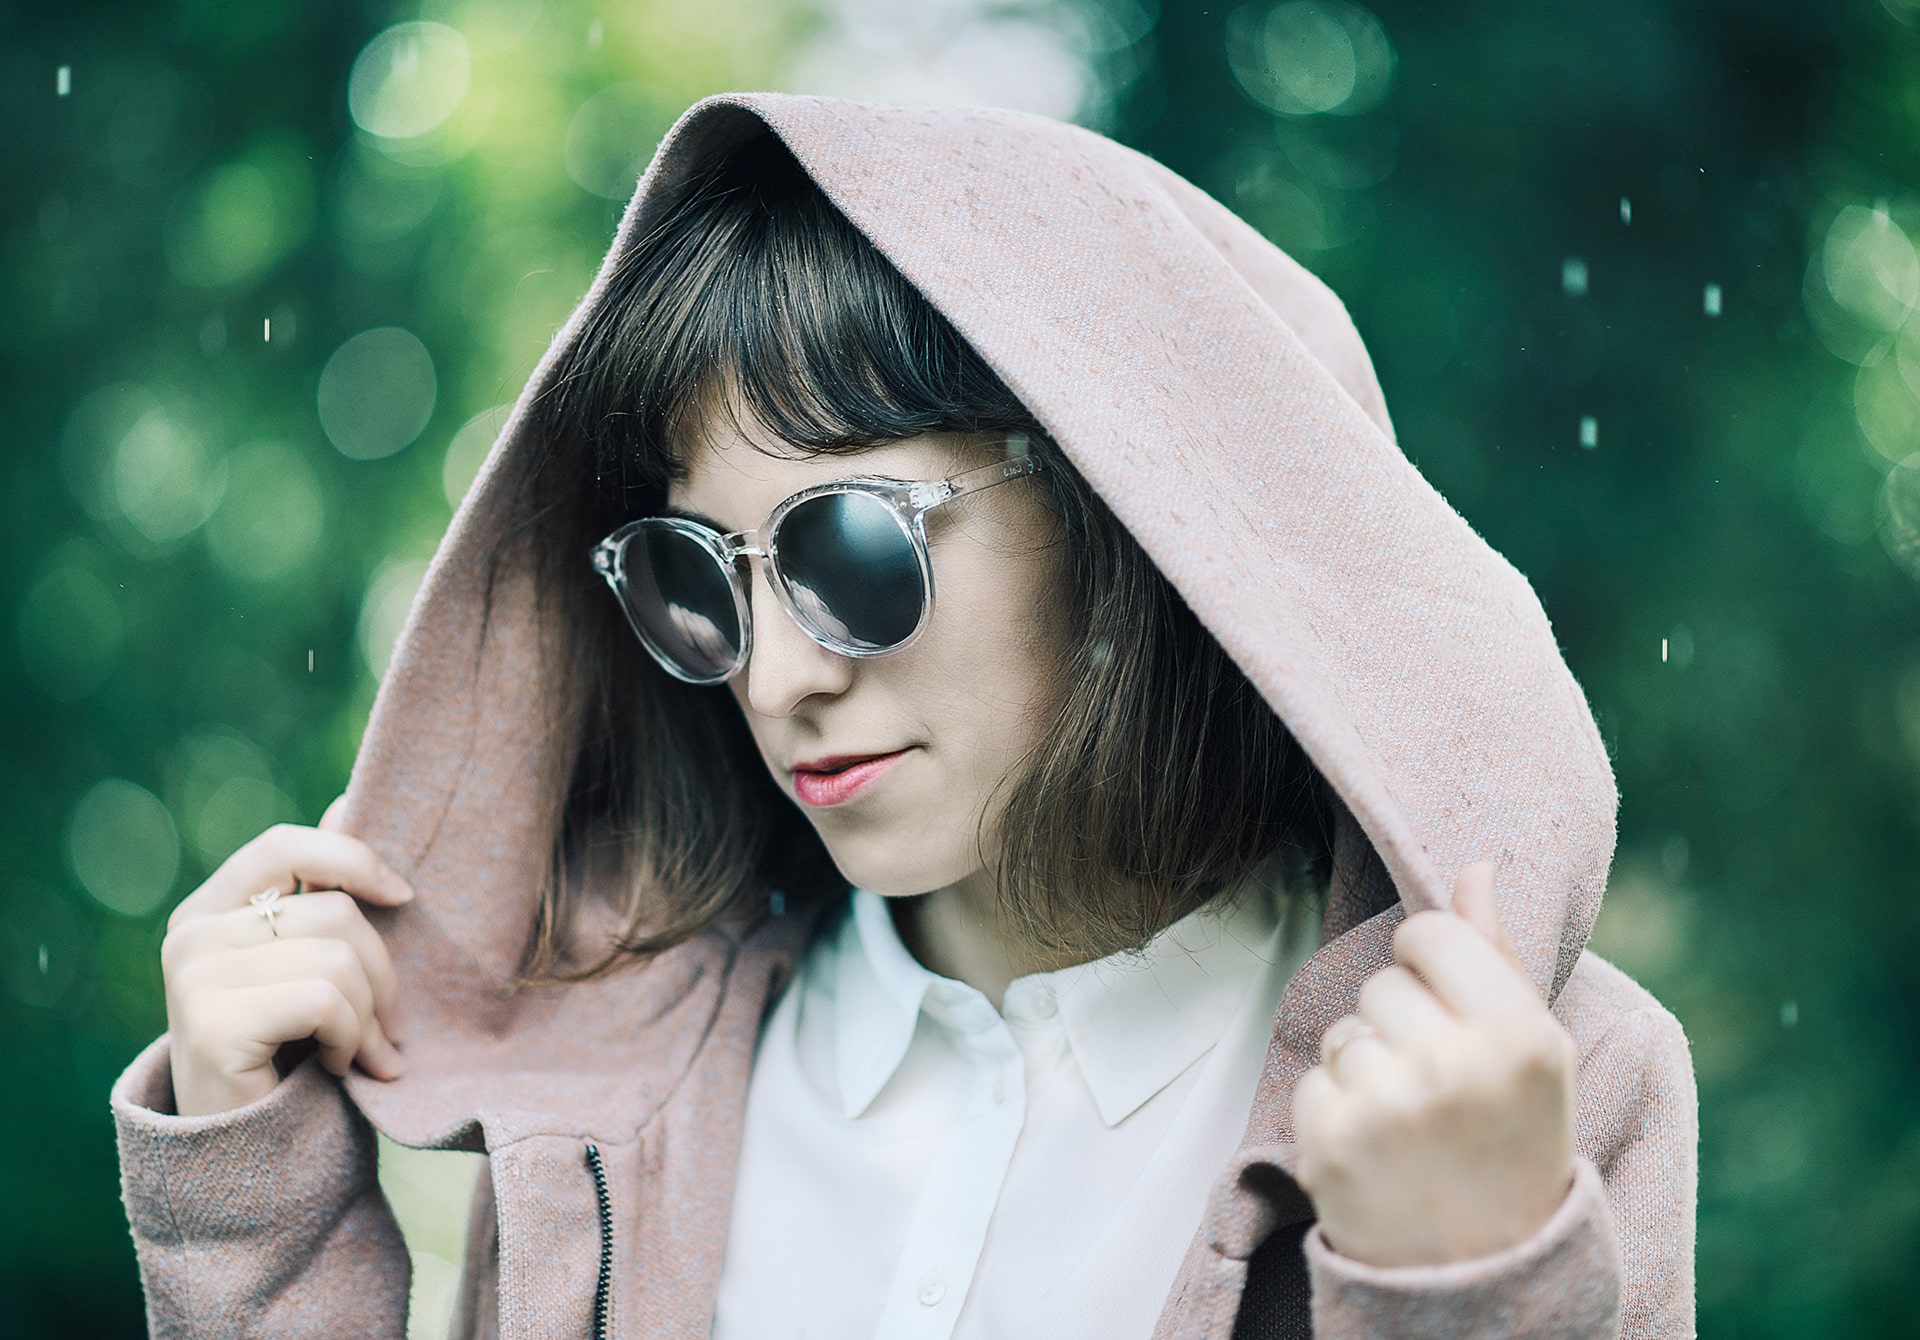 A female model wearing a pair of sunglasses in the rain